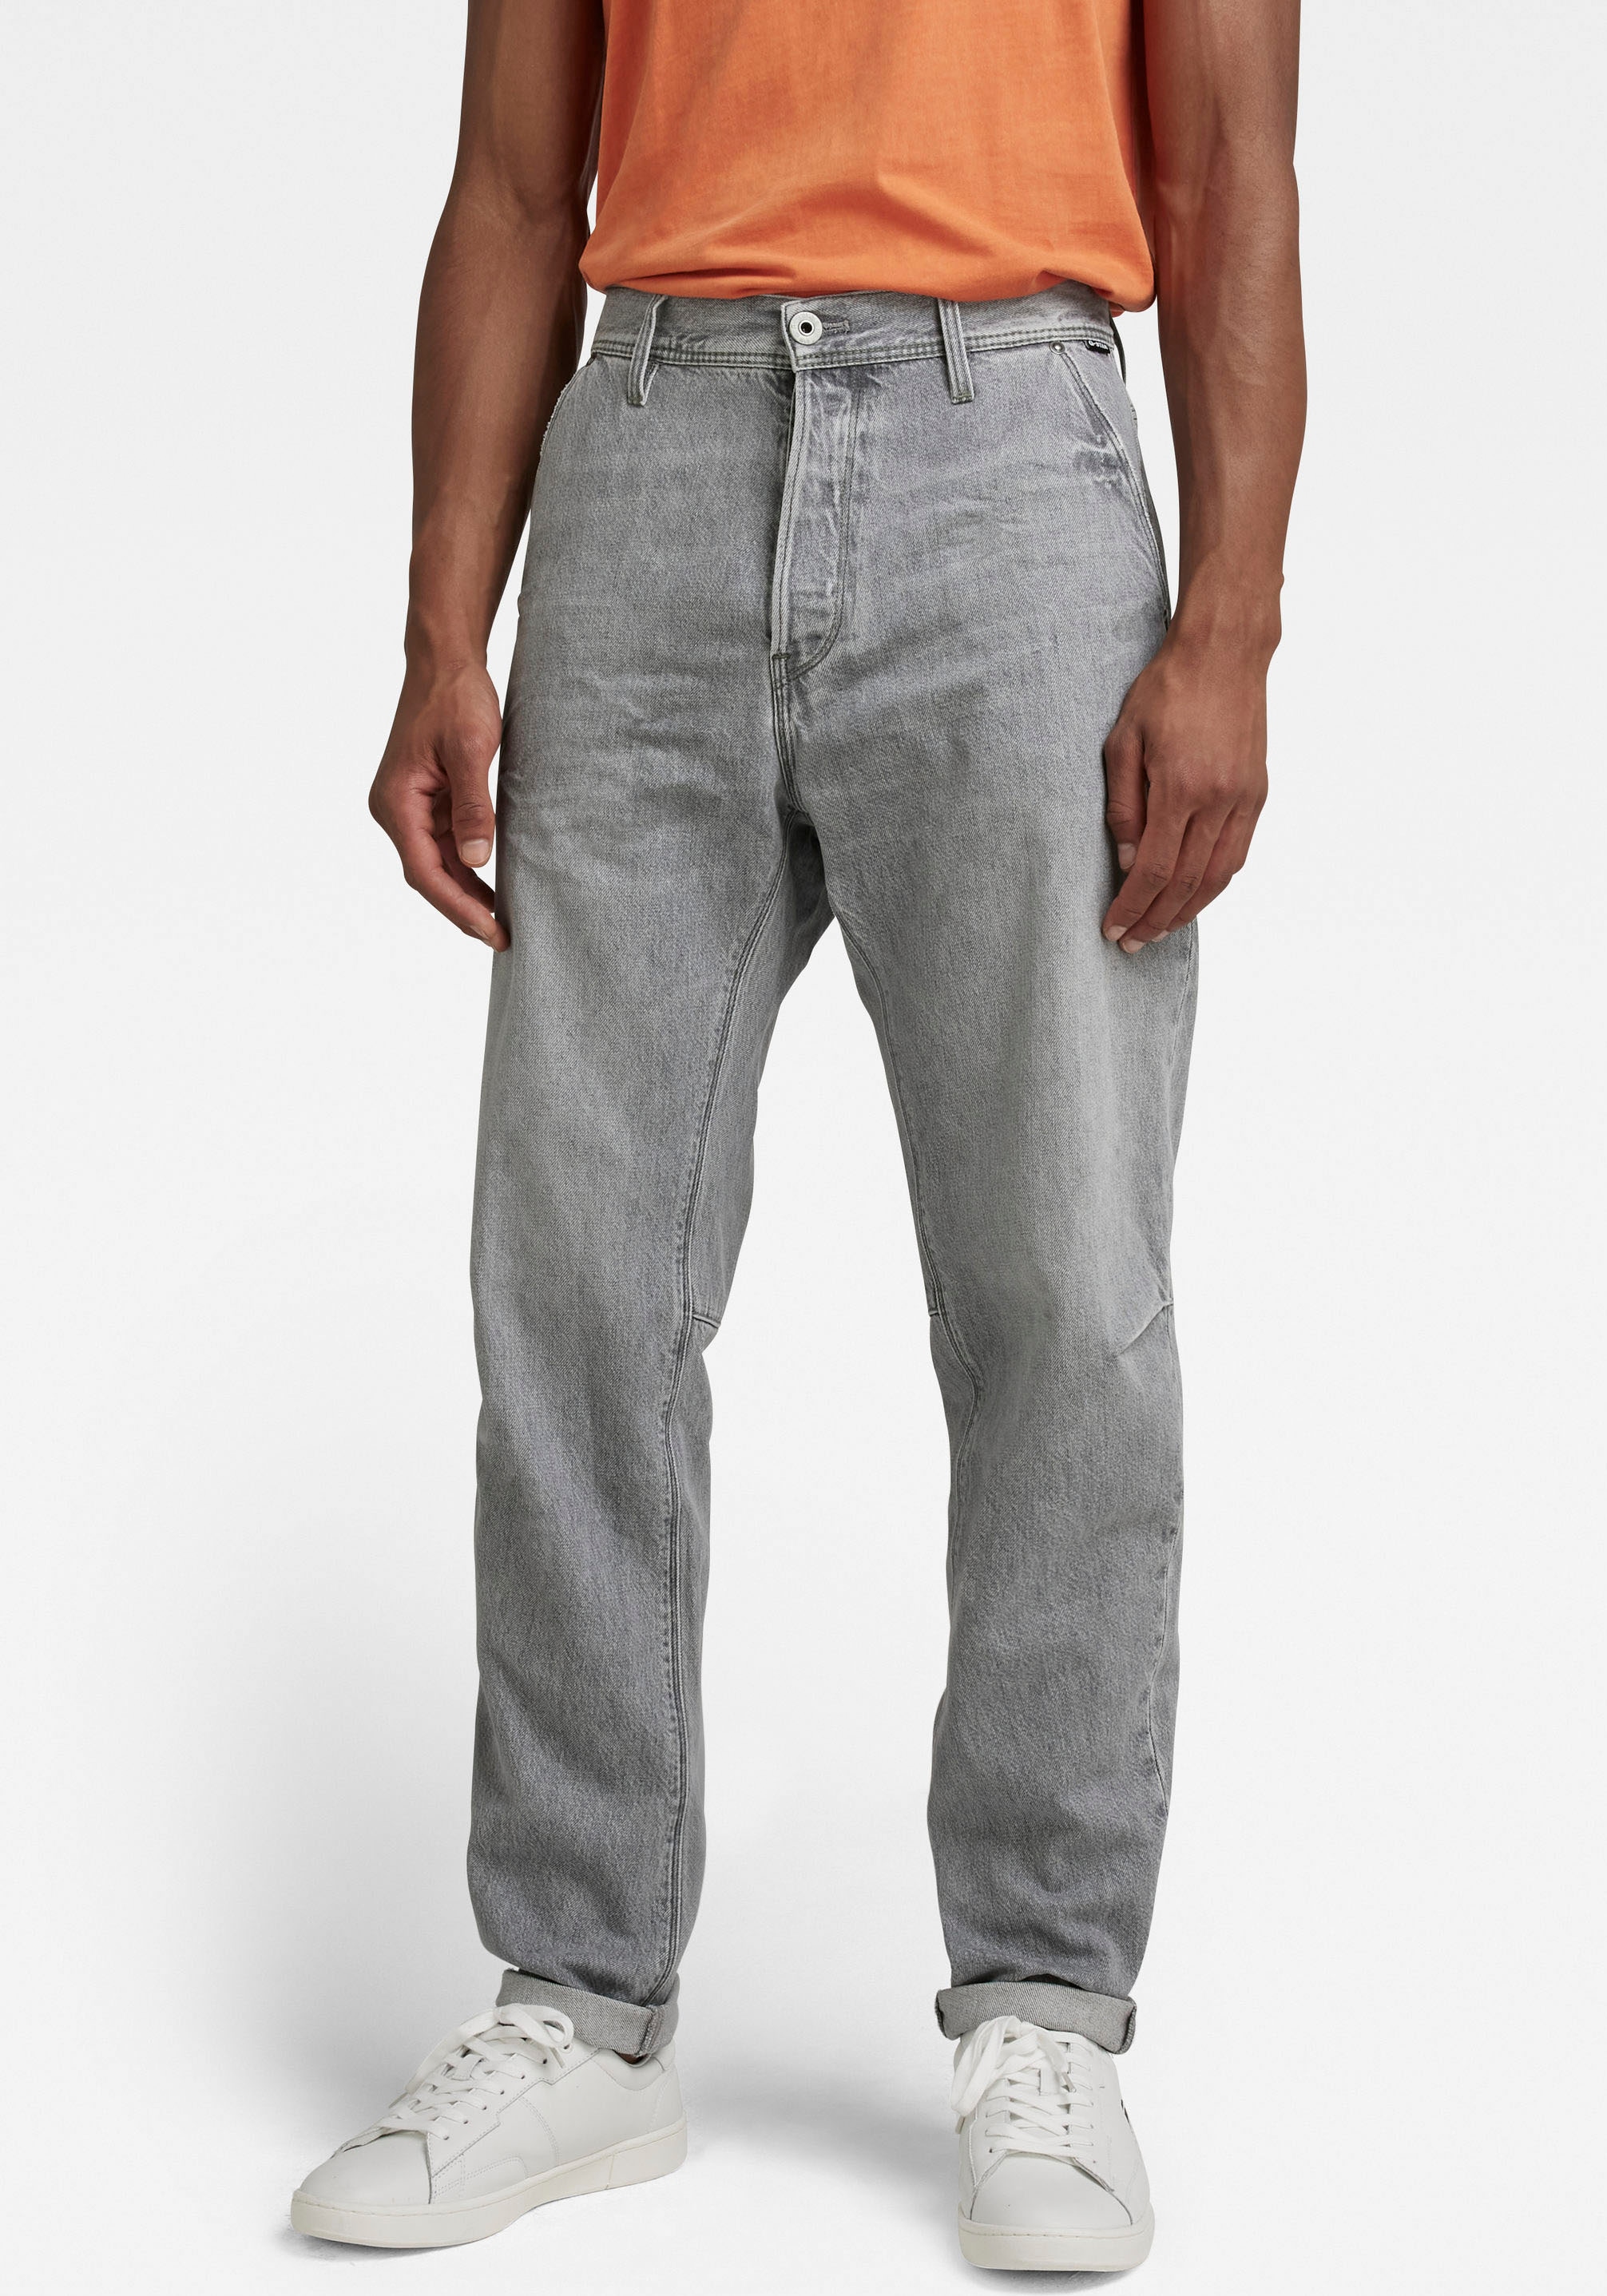 G-Star RAW Jelmoli-Versand shoppen 3d« | Grip Tapered-fit-Jeans Tapered »Relaxed online